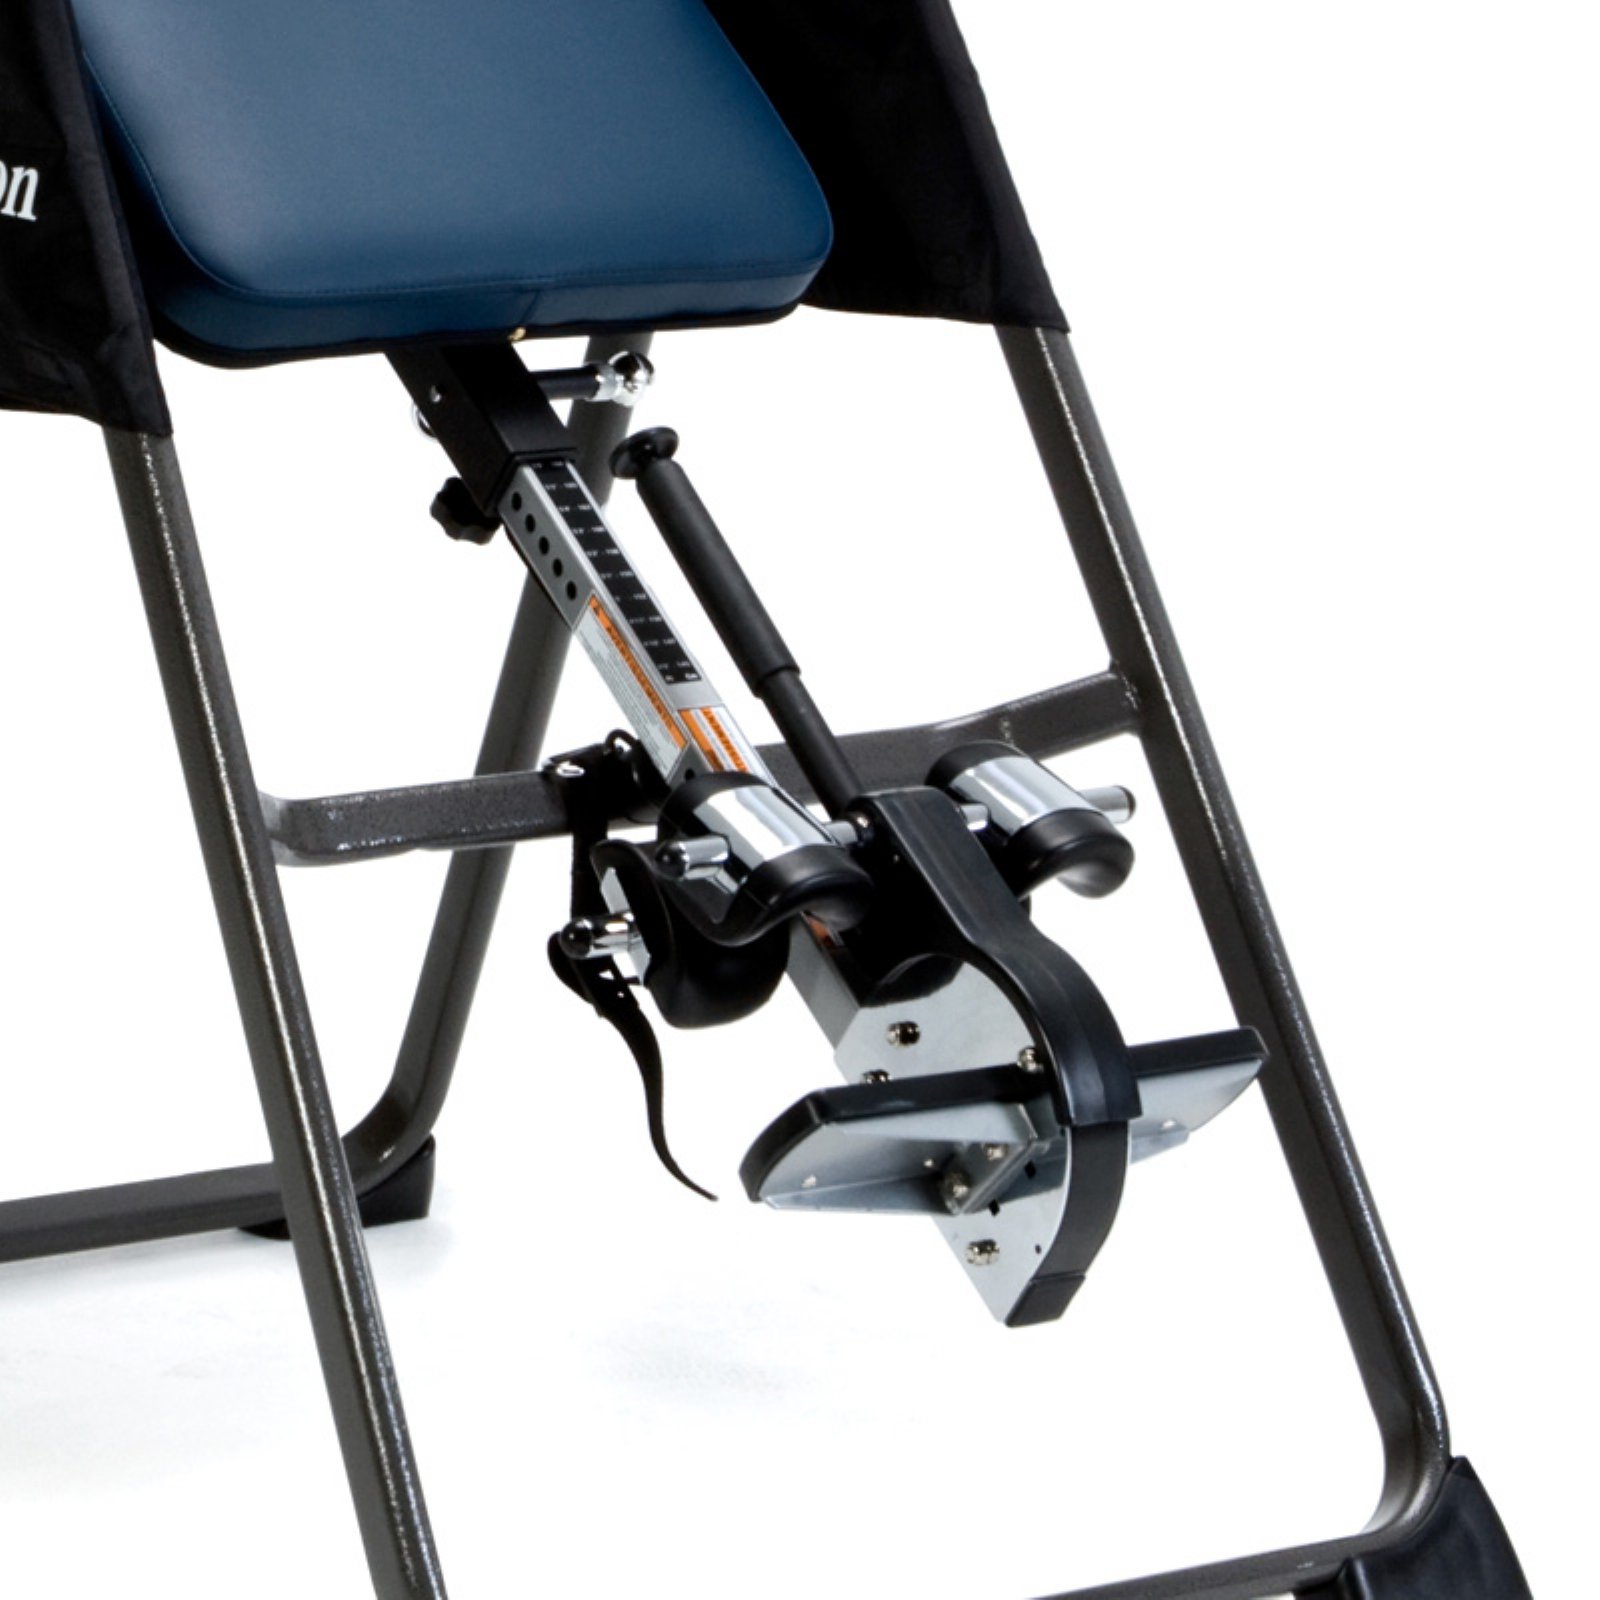 Ironman Fitness Gravity 4000 Highest Weight Capacity Inversion Table - image 3 of 6